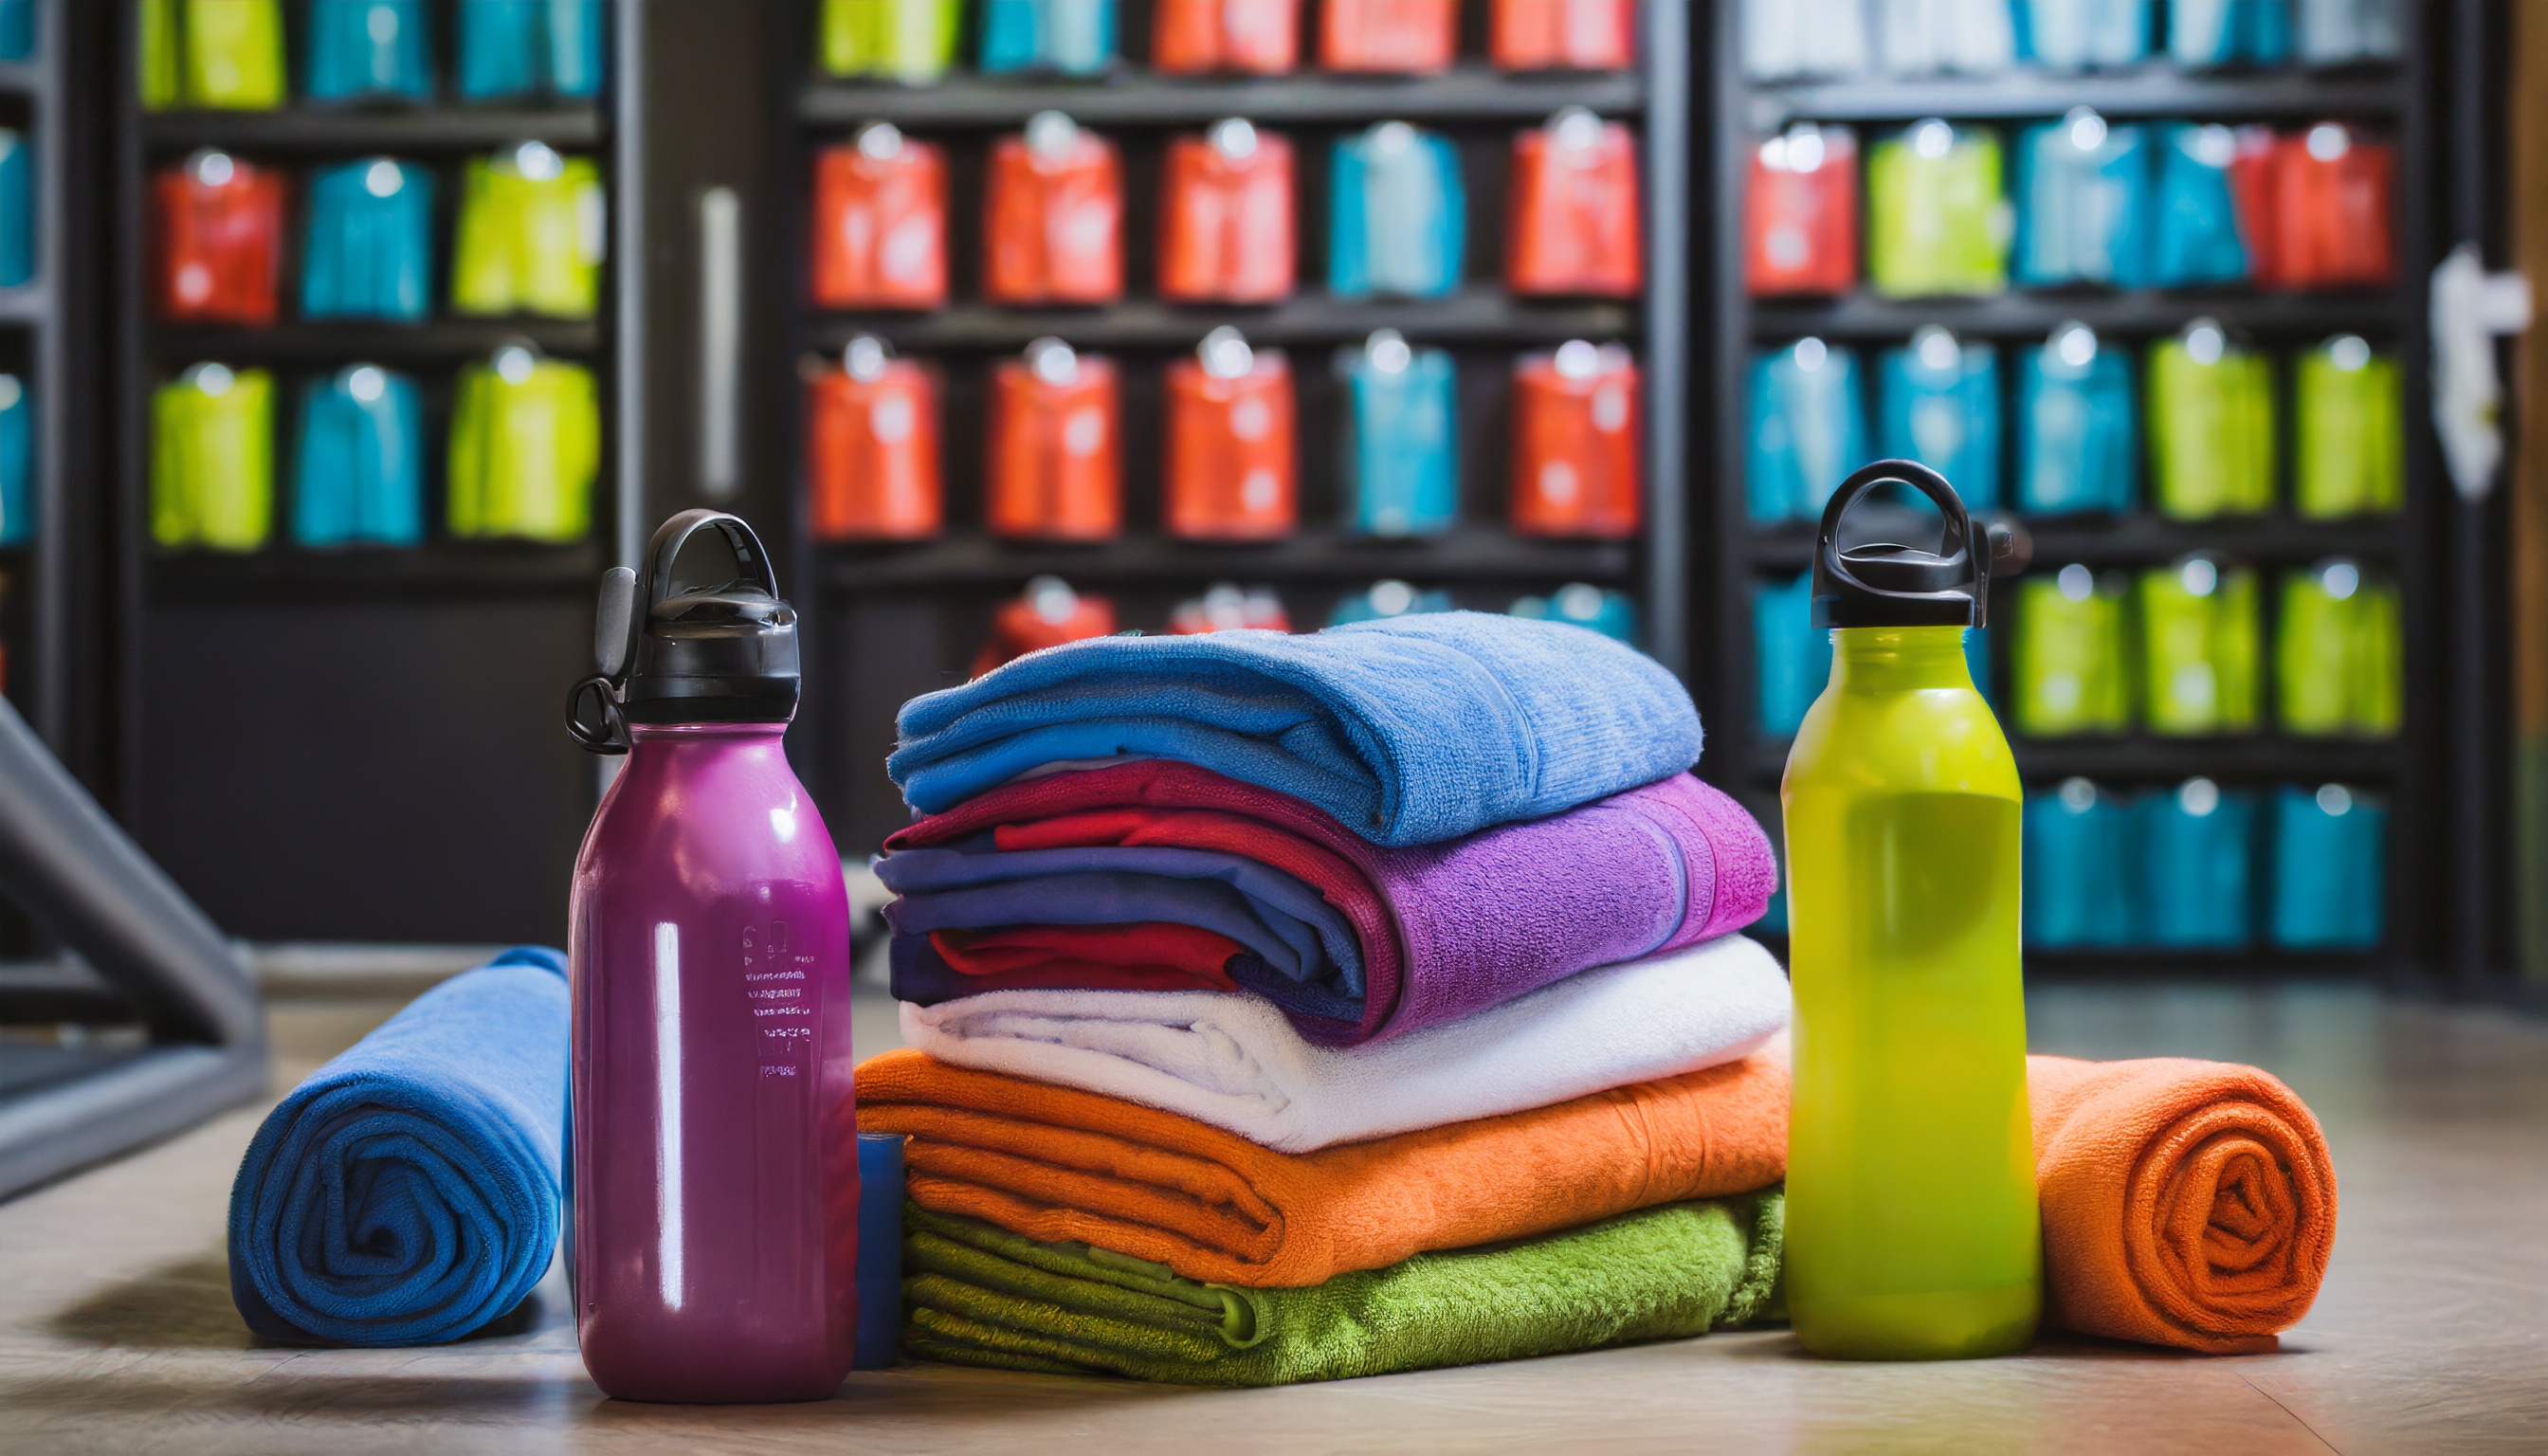 Firefly_A_pile_of_colorful_folded_gym_towels_surrounded_by_sports_drinking_bottles__gym_lockers_in_b.jpg